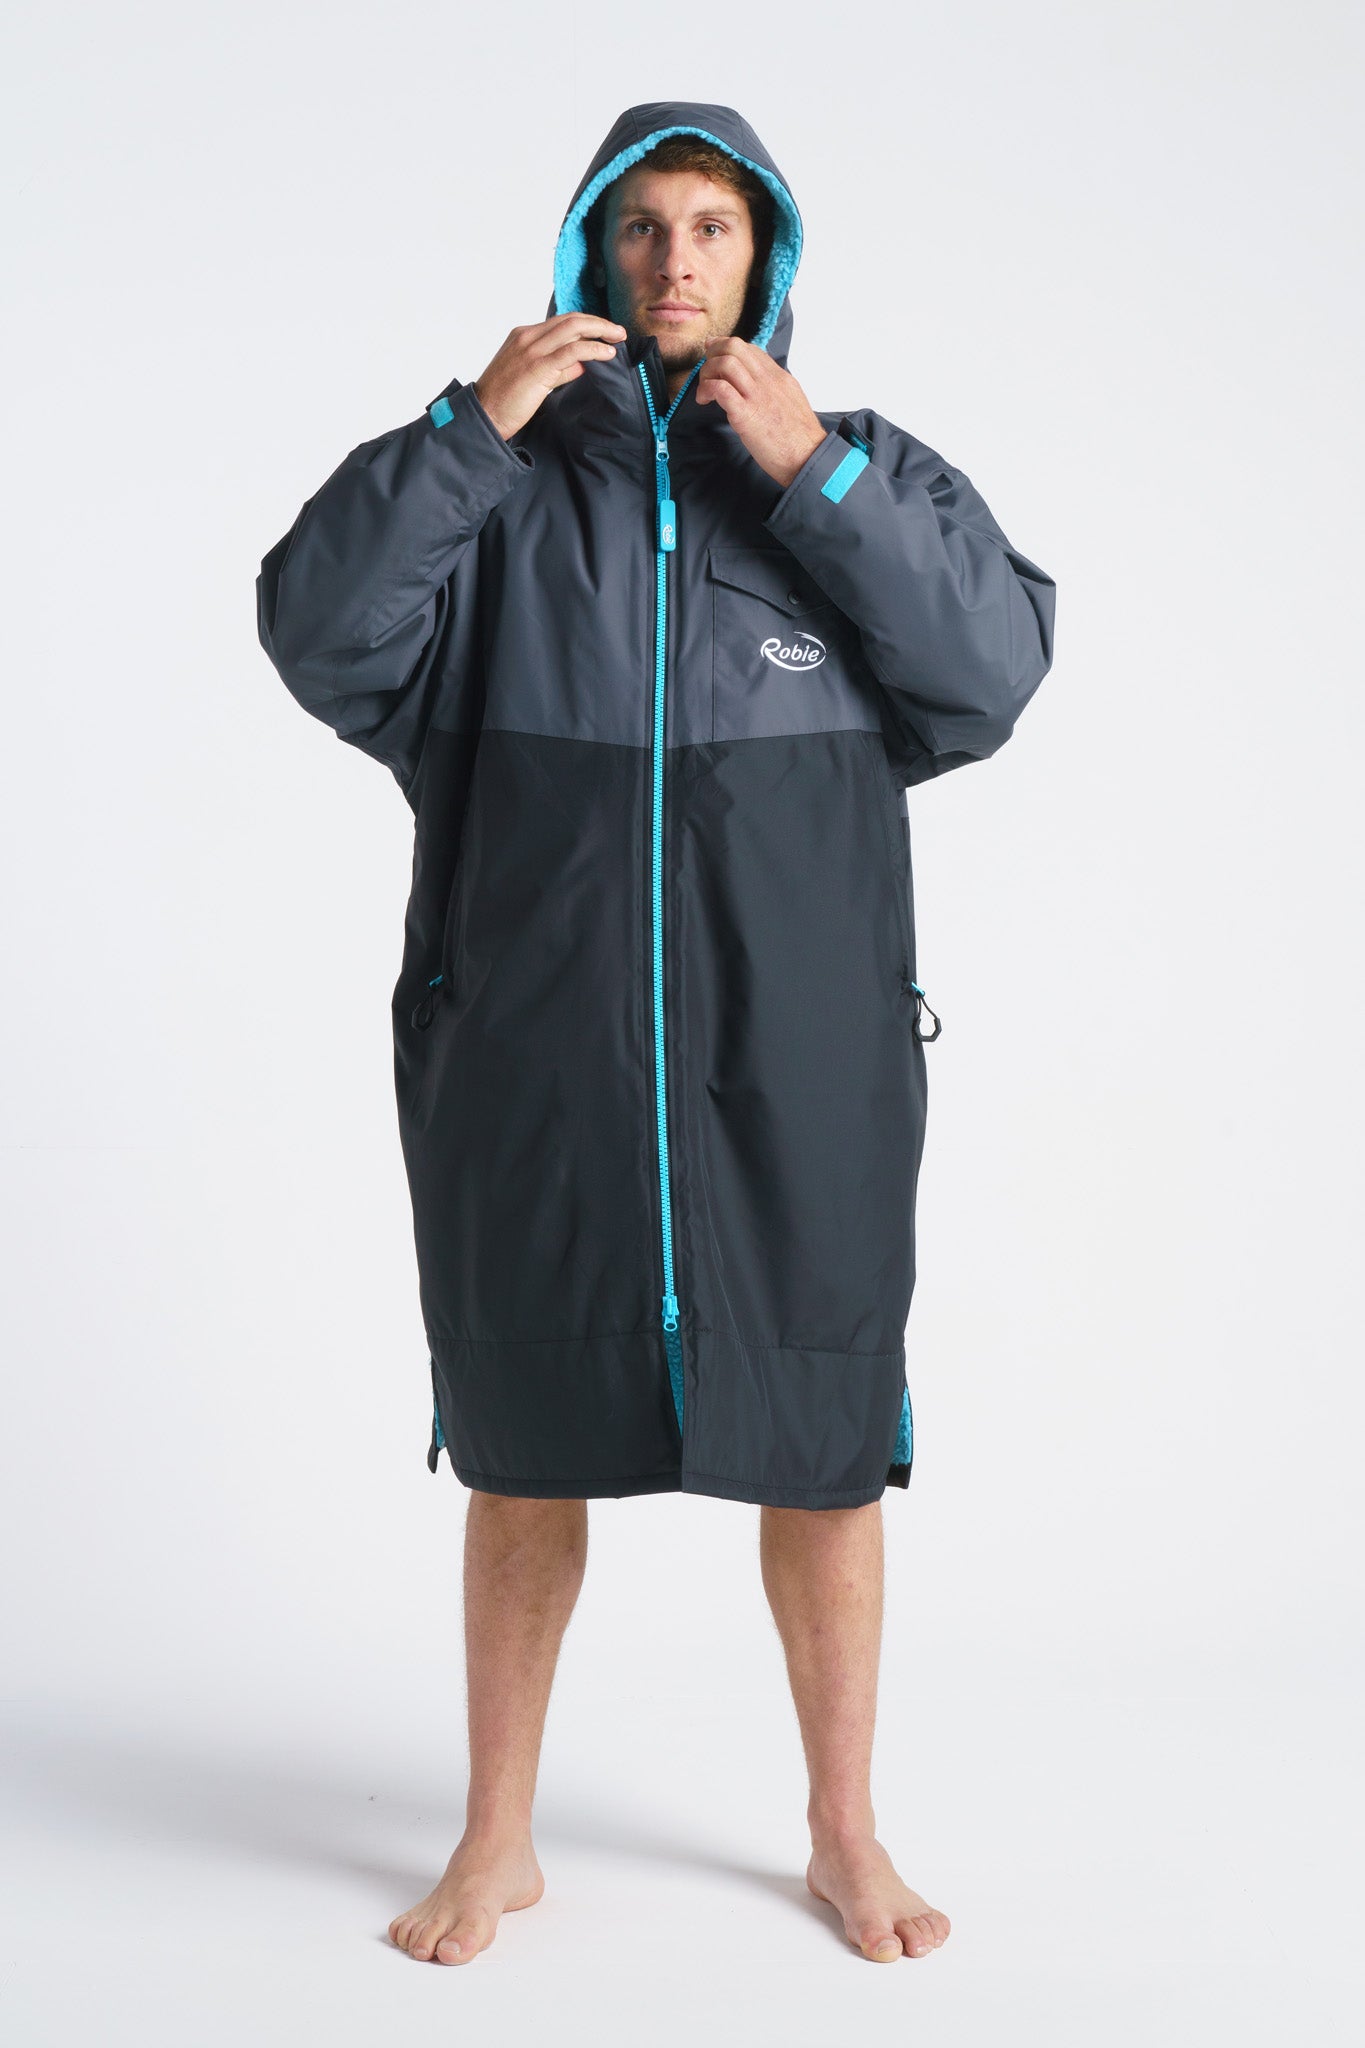 robie-robes-dry-series-changing-robe-waterproof-preorder-product-blacksheepsurfco-galway-ireland-charcoal-blue-atoll